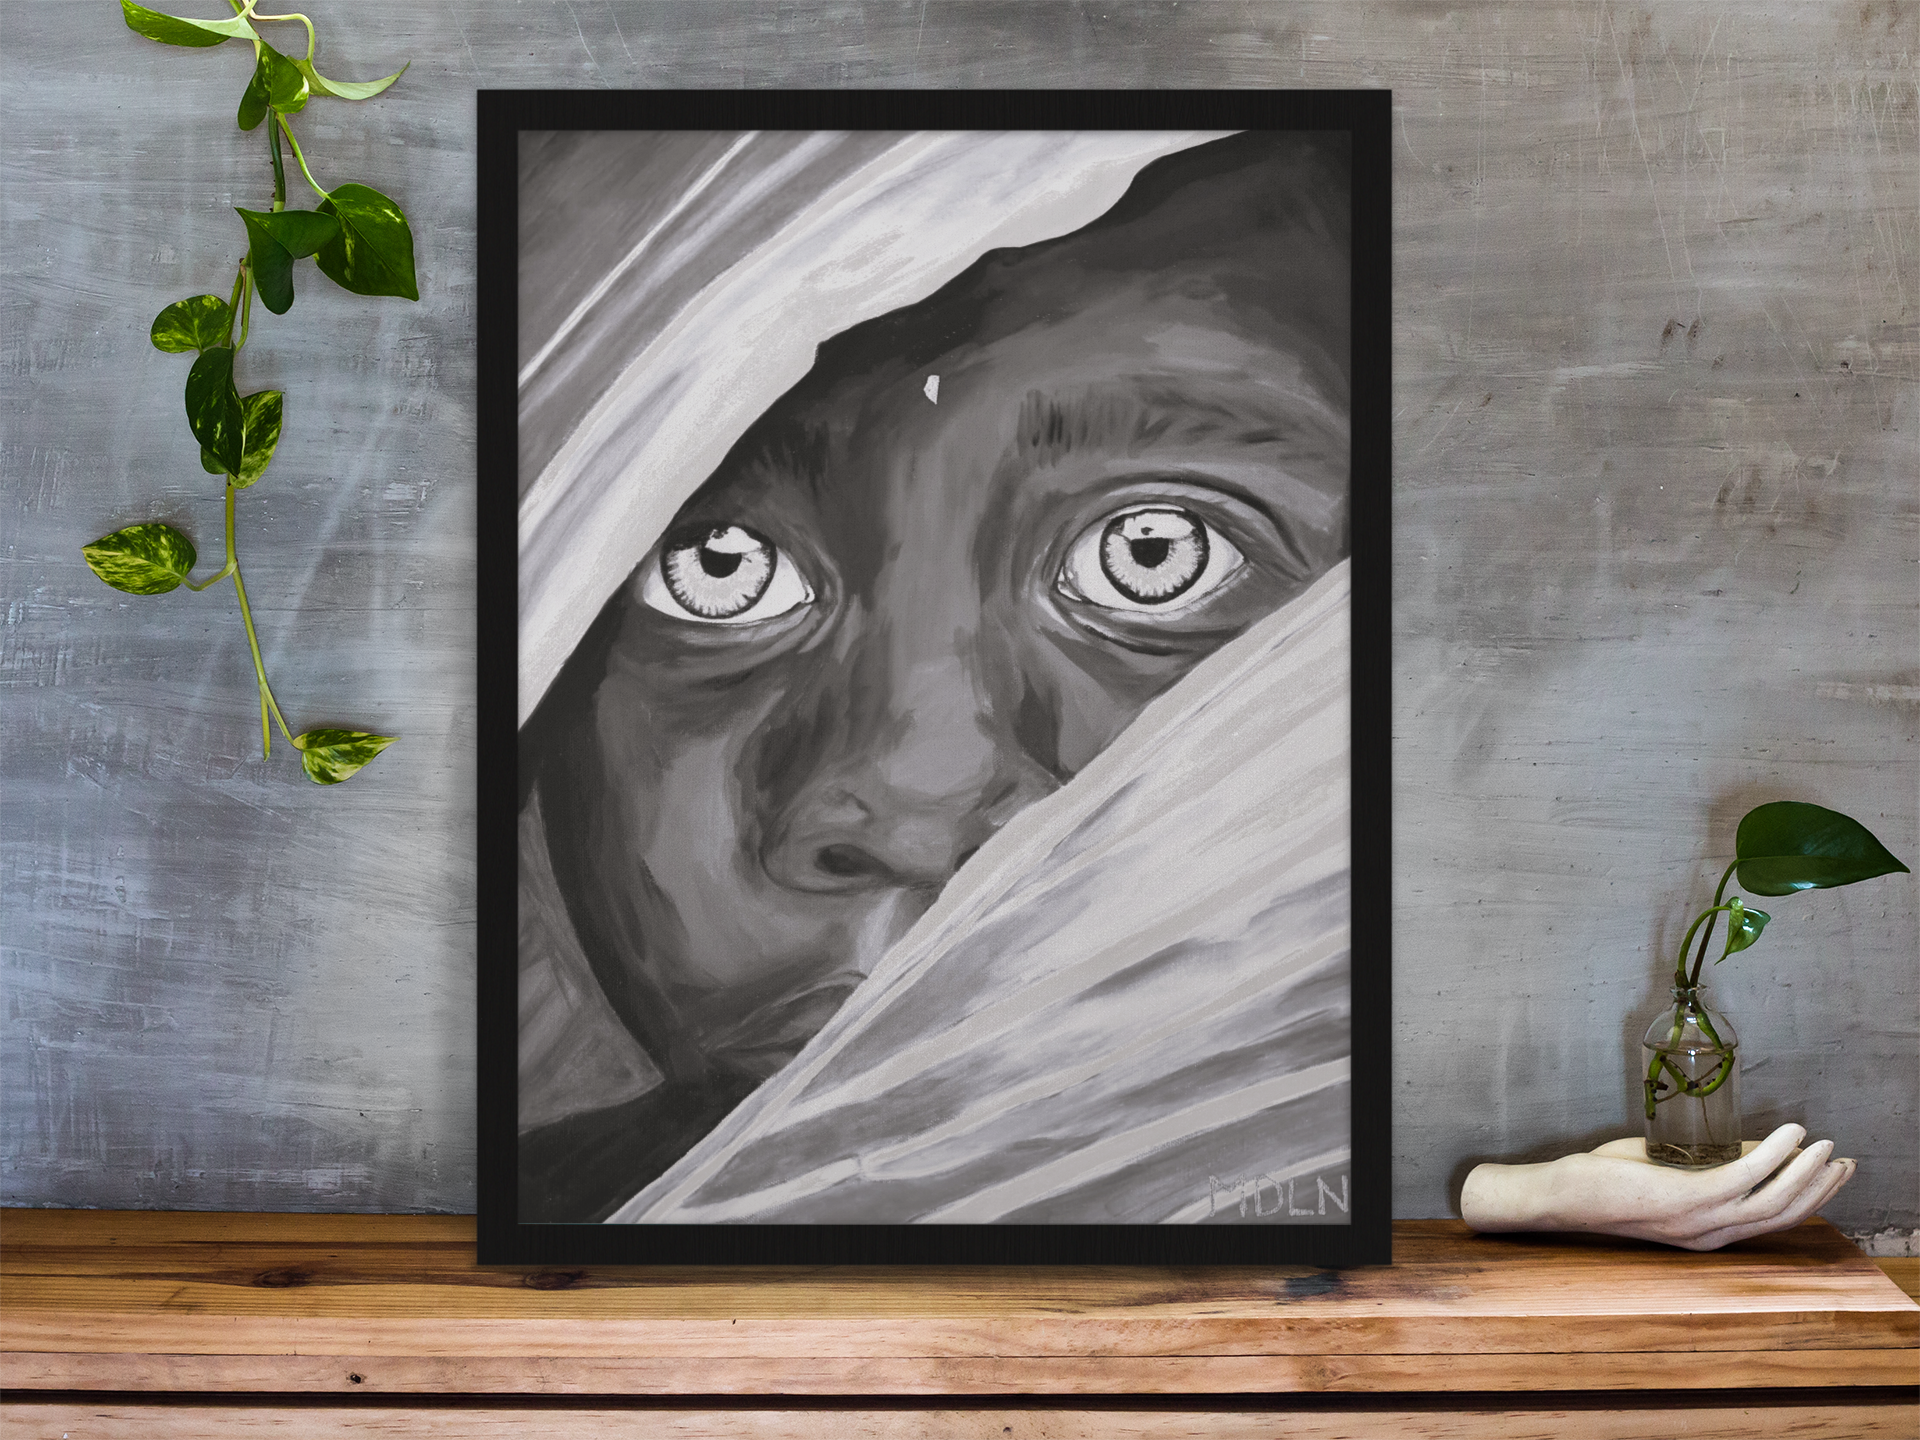 A black and white giclee art print showing an African Boy, leaning up against a wall on a desk